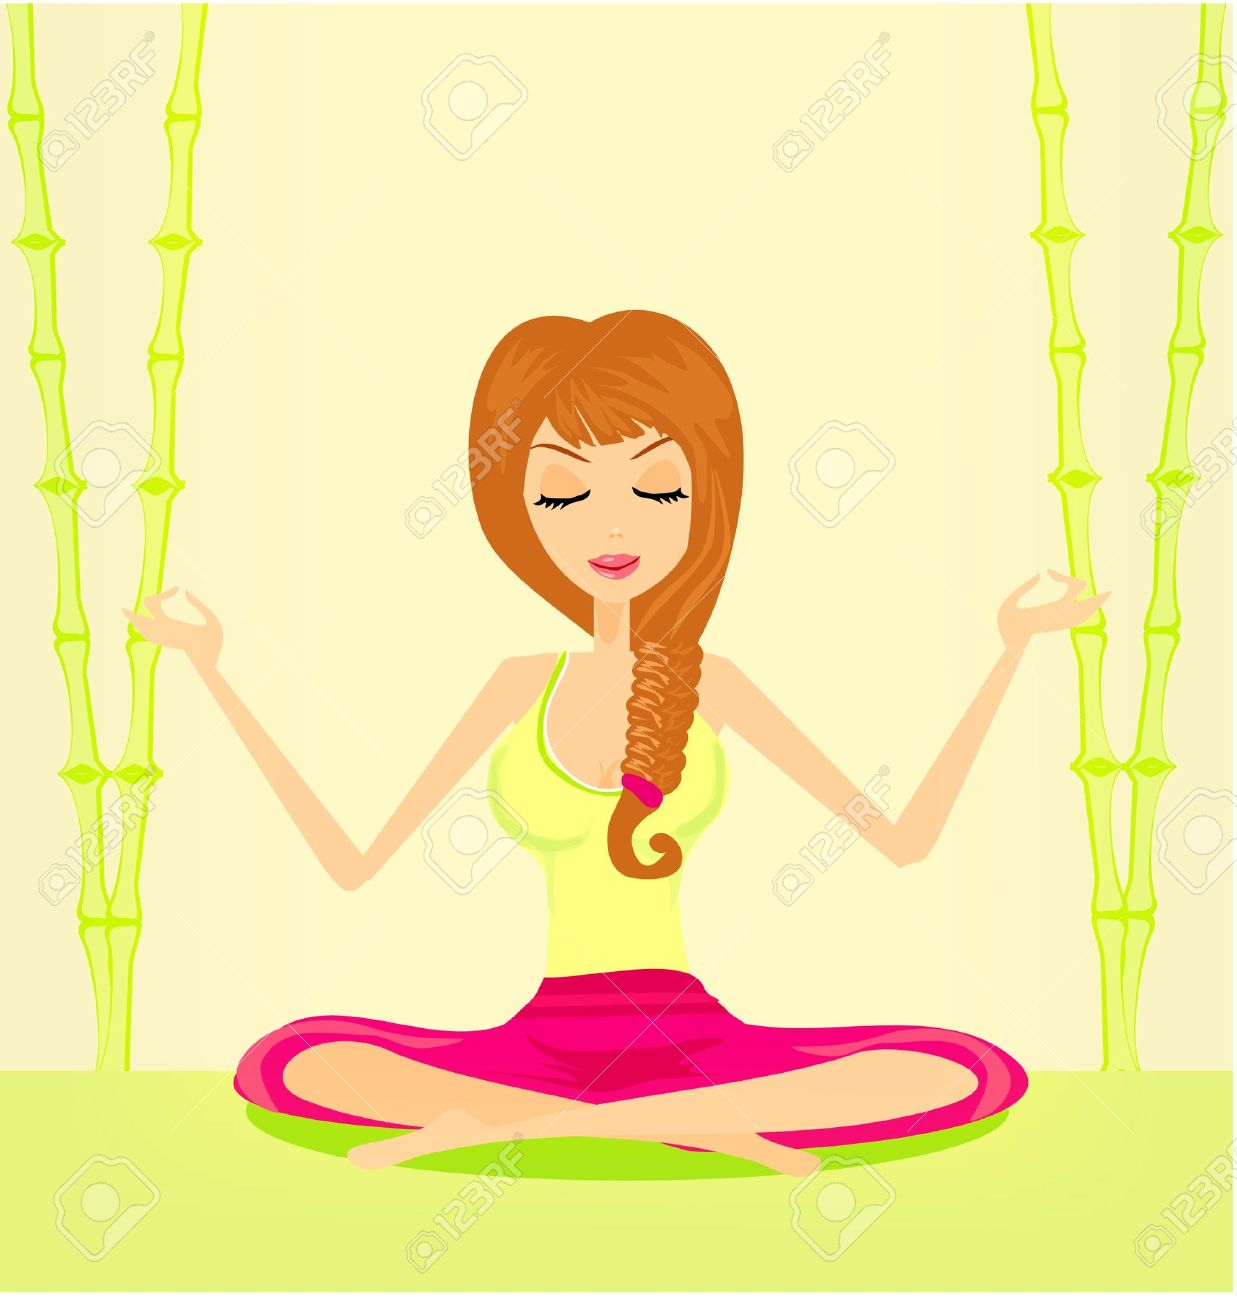 relaxation clipart images - photo #19